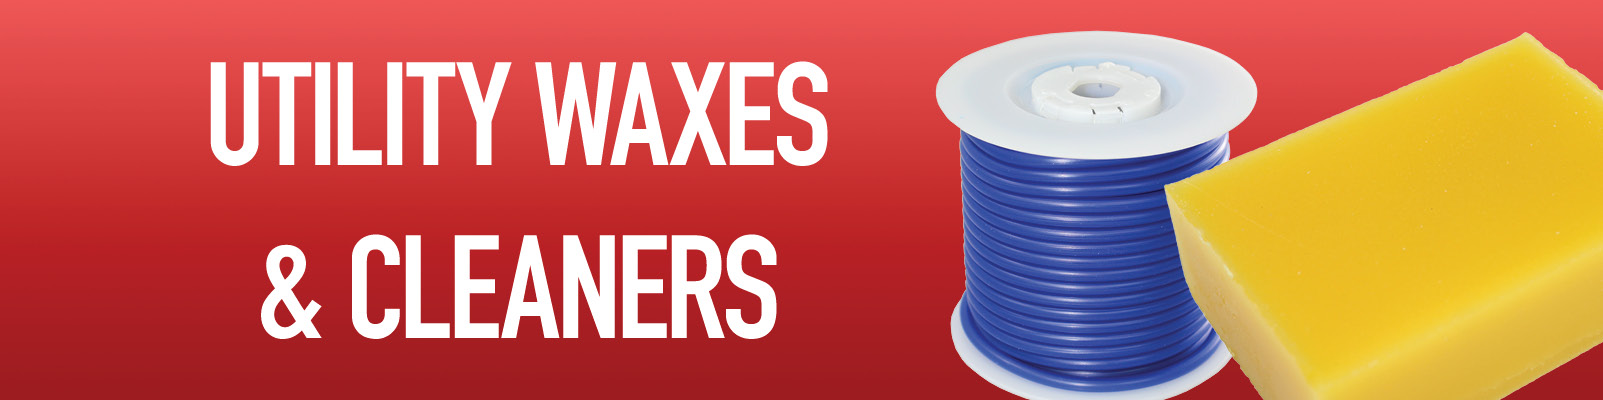 Utility Wax Wire & Cleaners